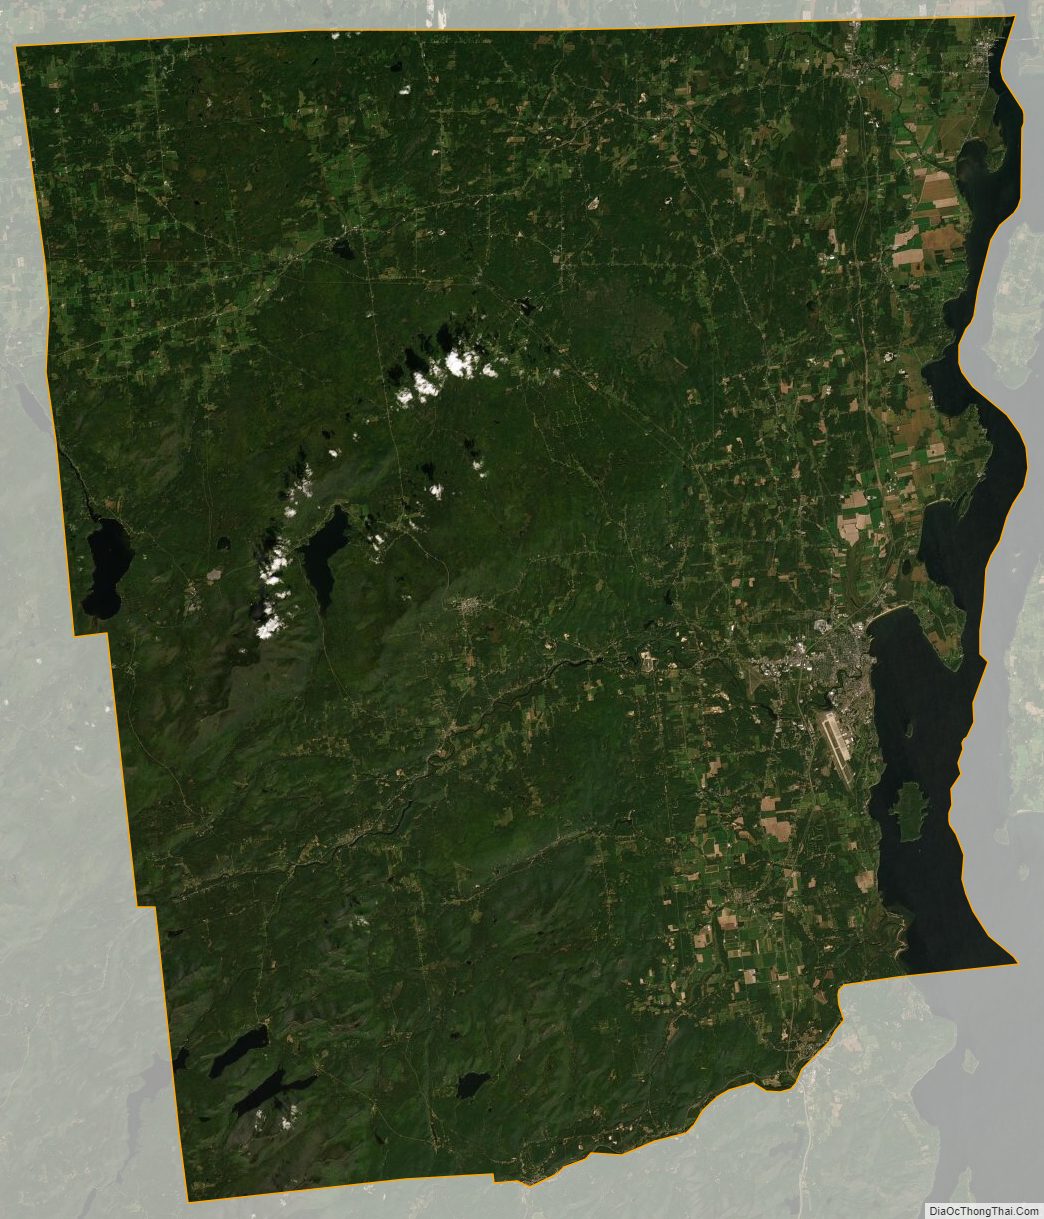 Satellite map of Clinton County, New York